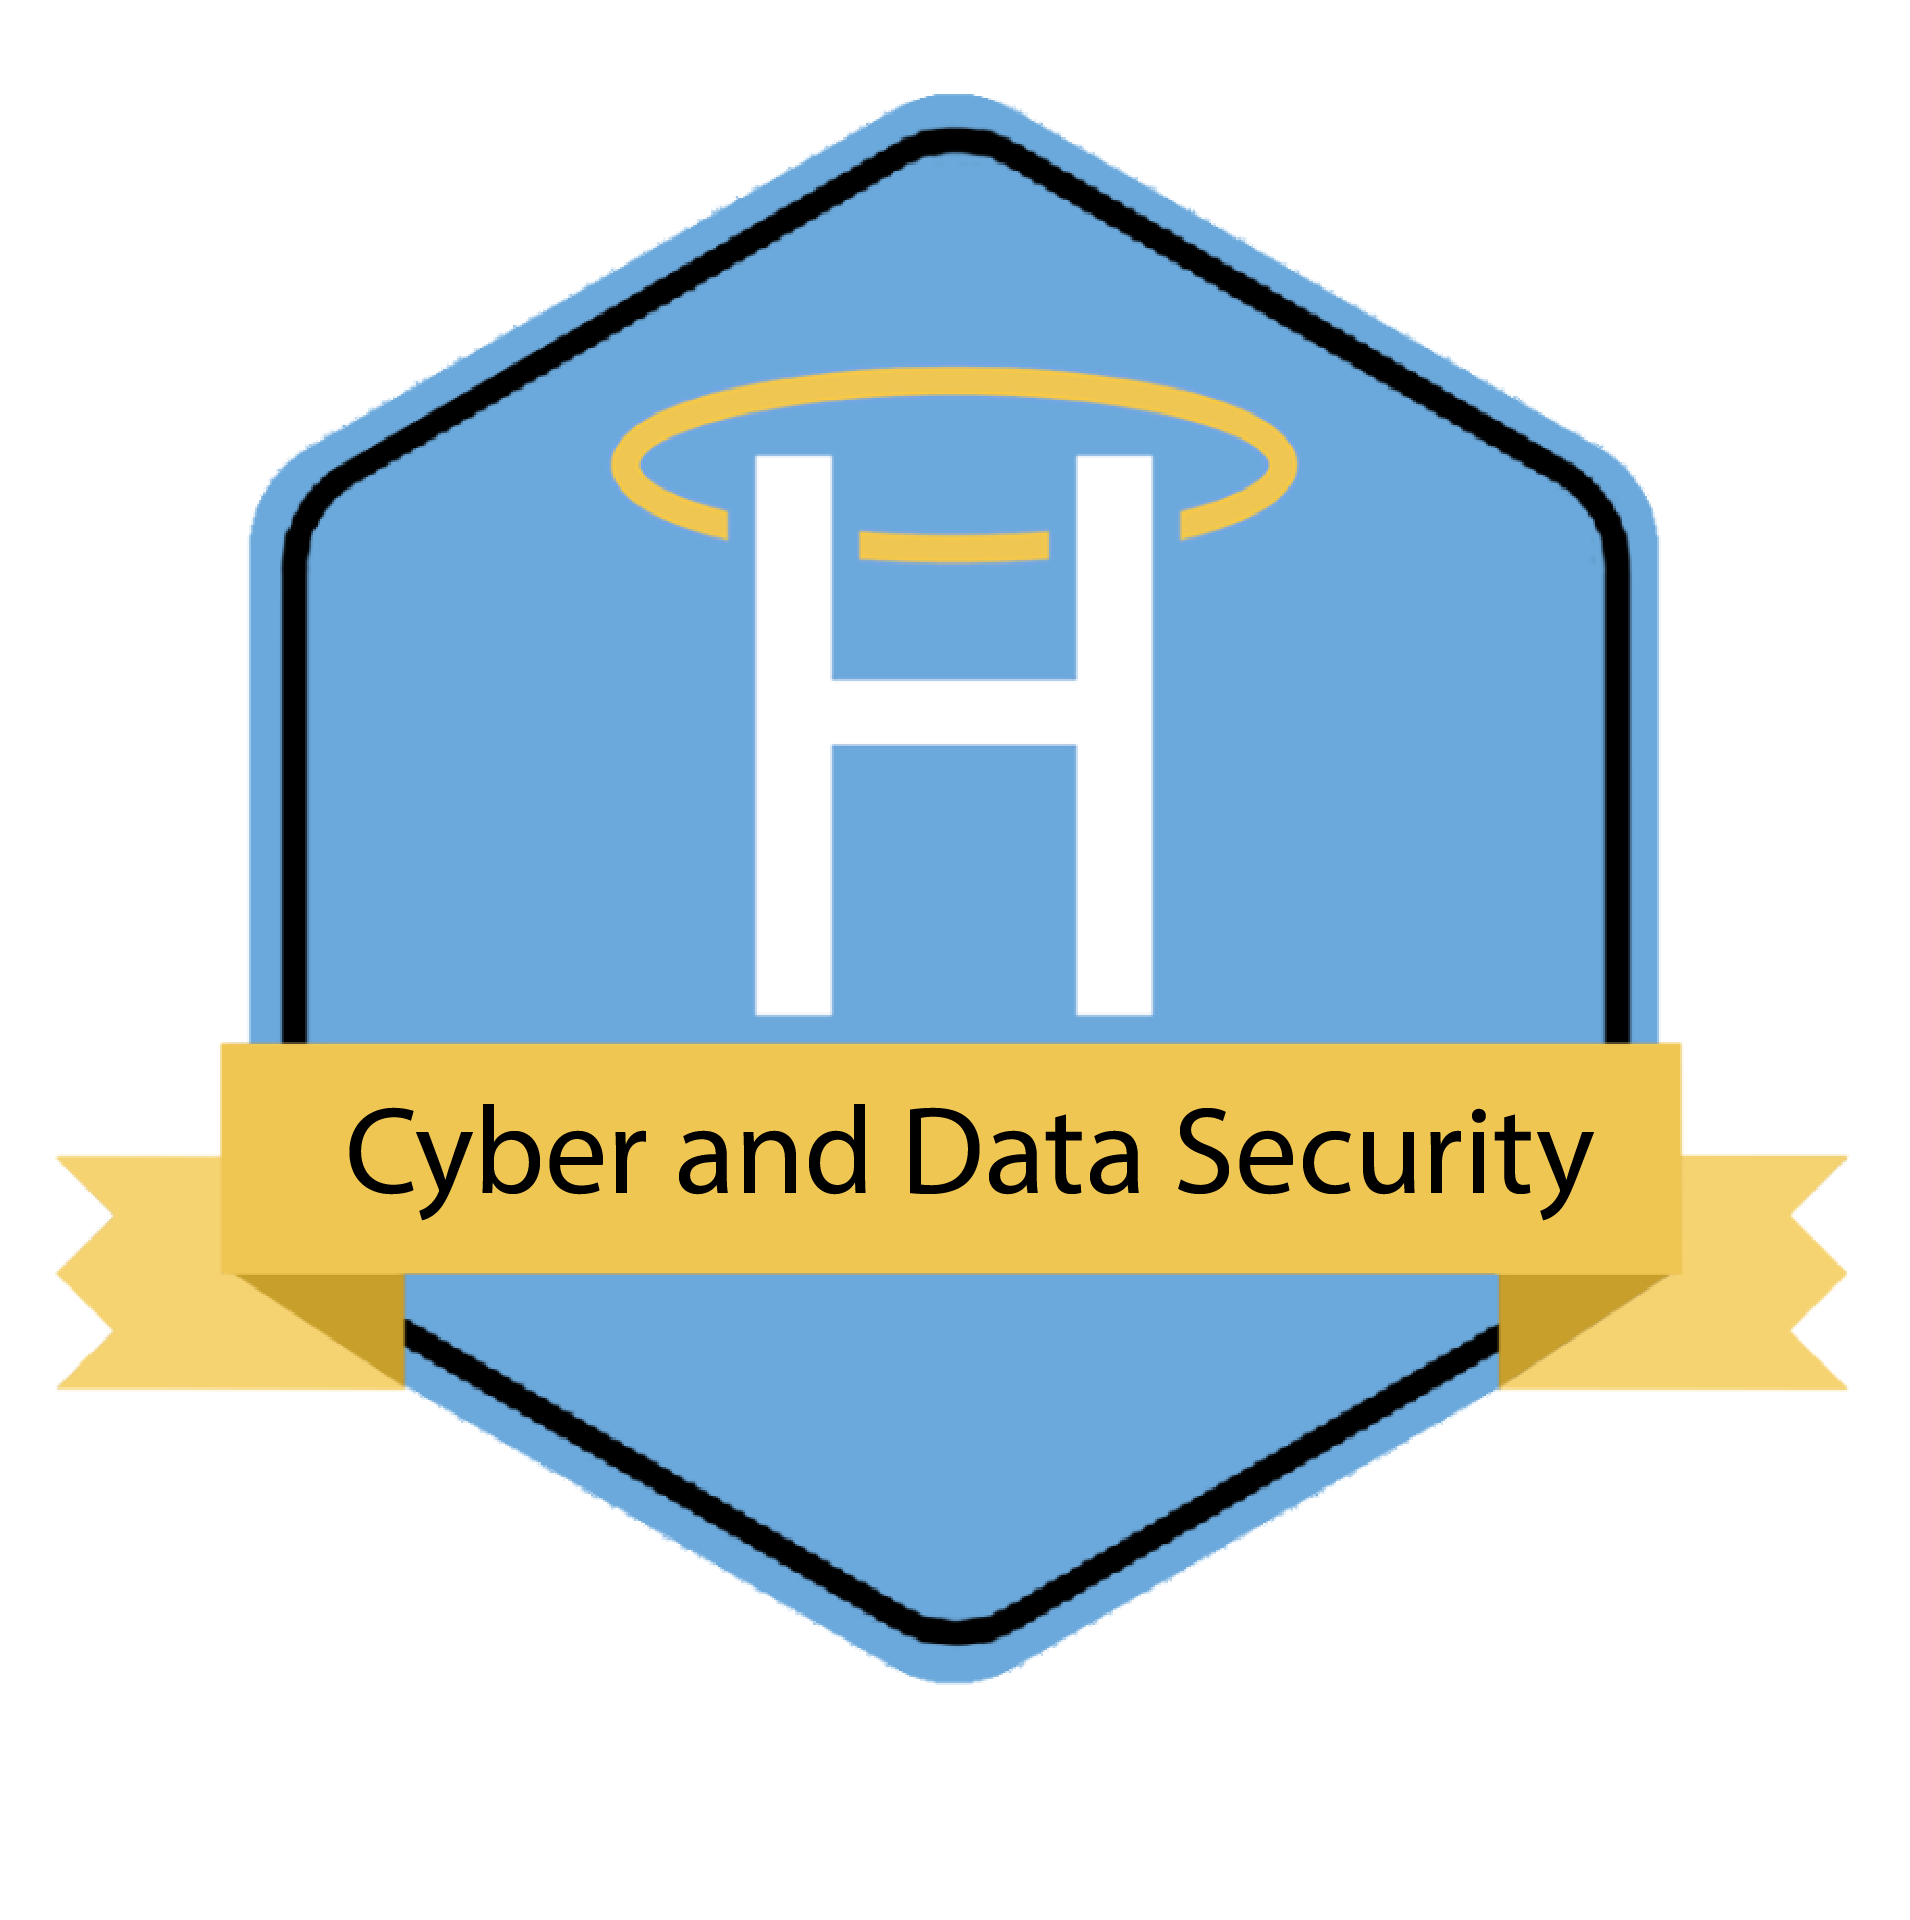 Cyber and Data Security Digital Badge